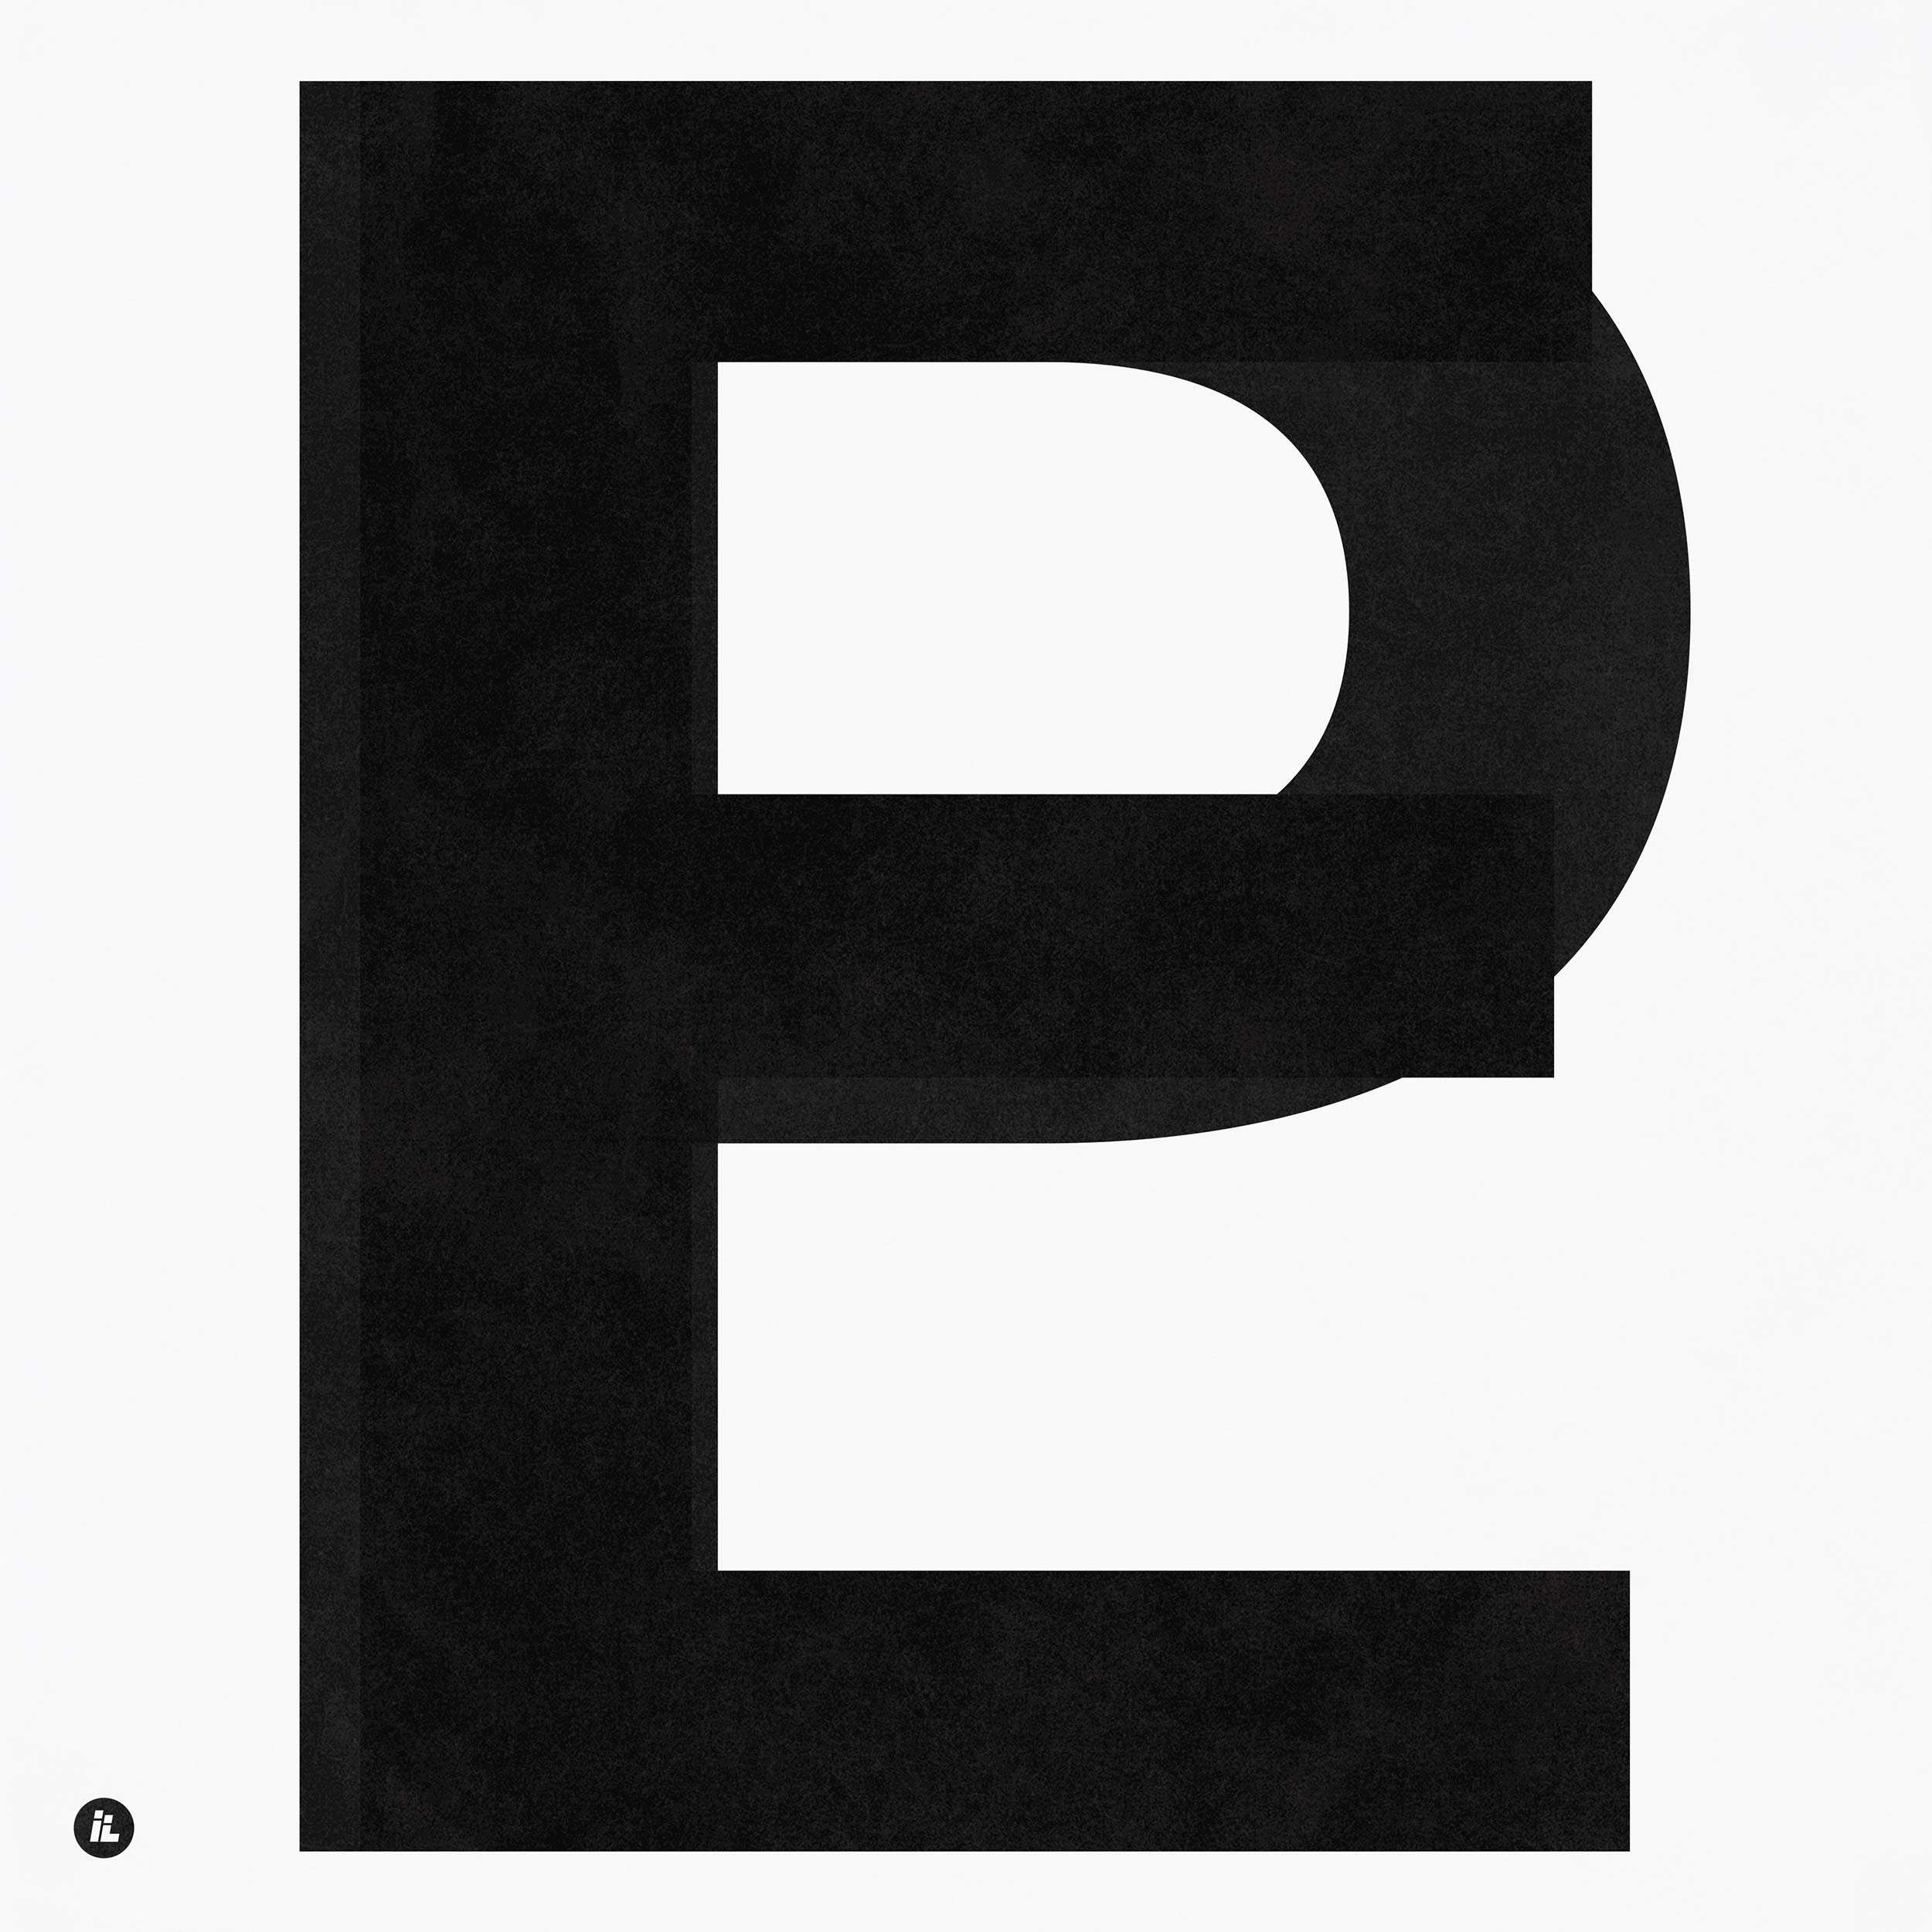 Artwork for the band Peels self-titled EP, Peel, Released October 16, 2020. The cover is black and white typography.